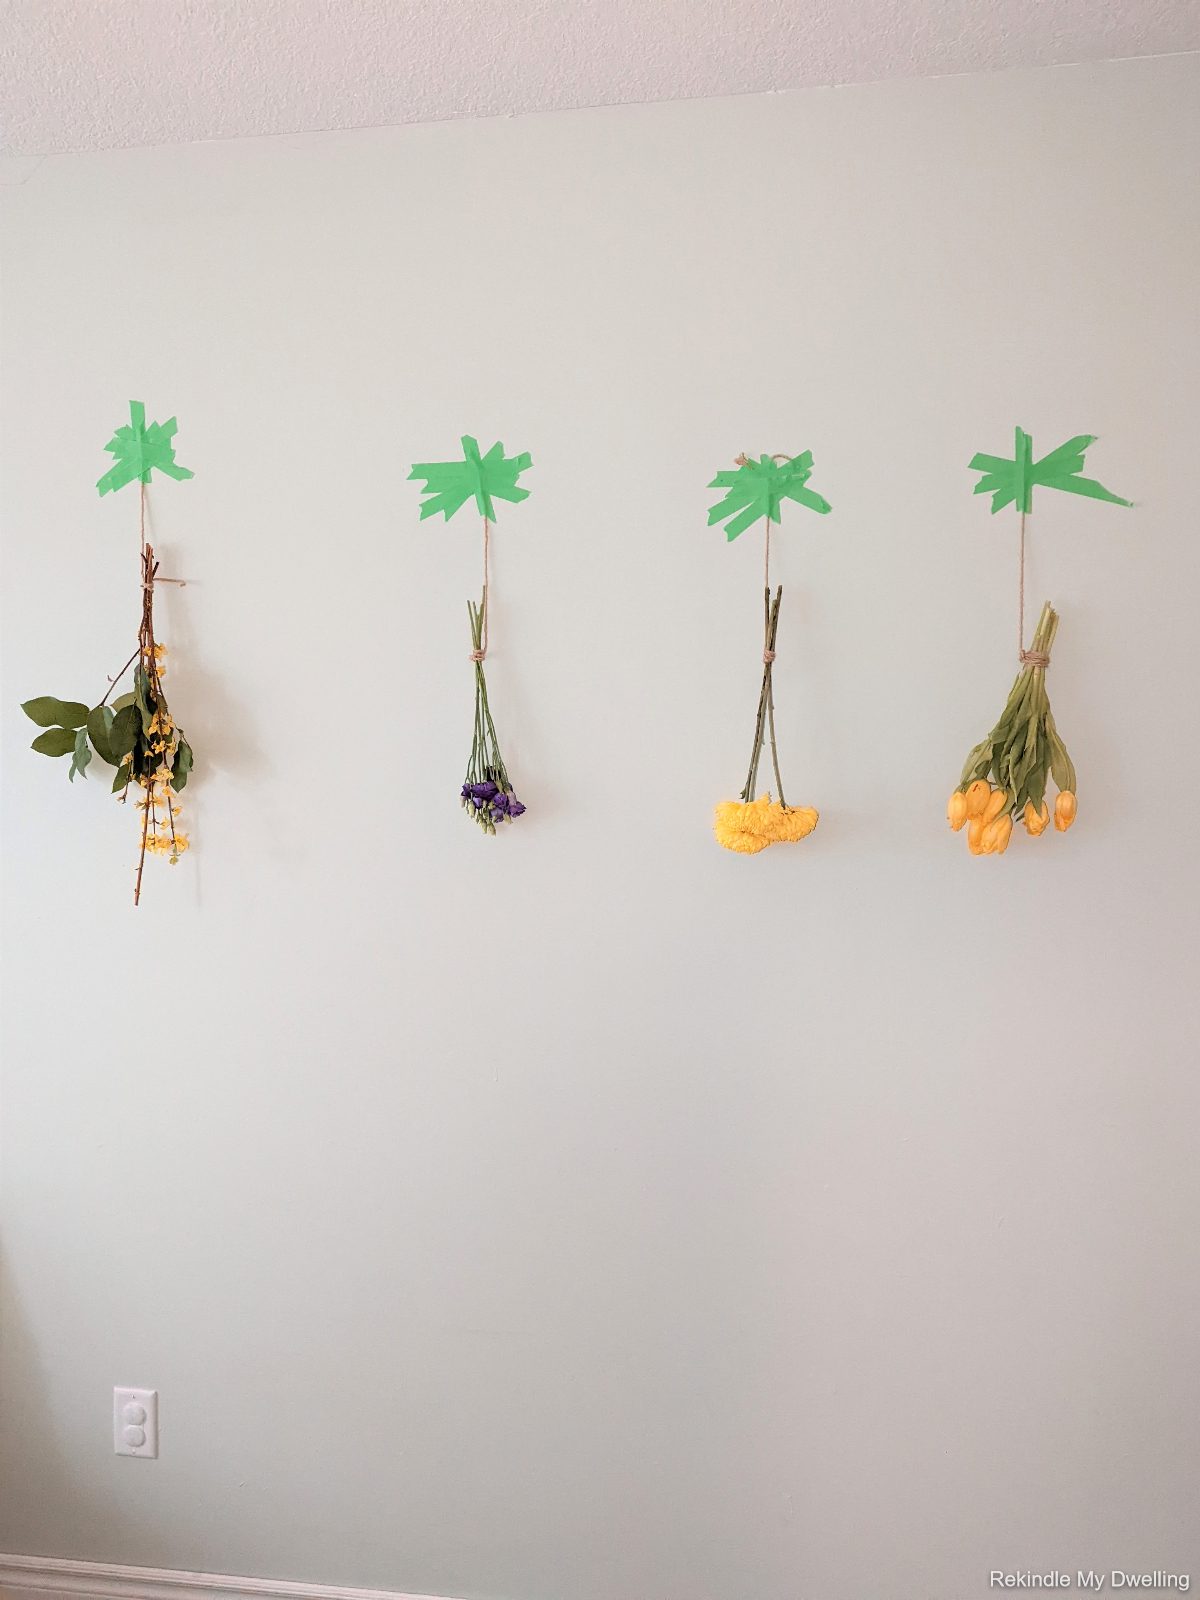 Flowers tied together and hung on a wall upside down.